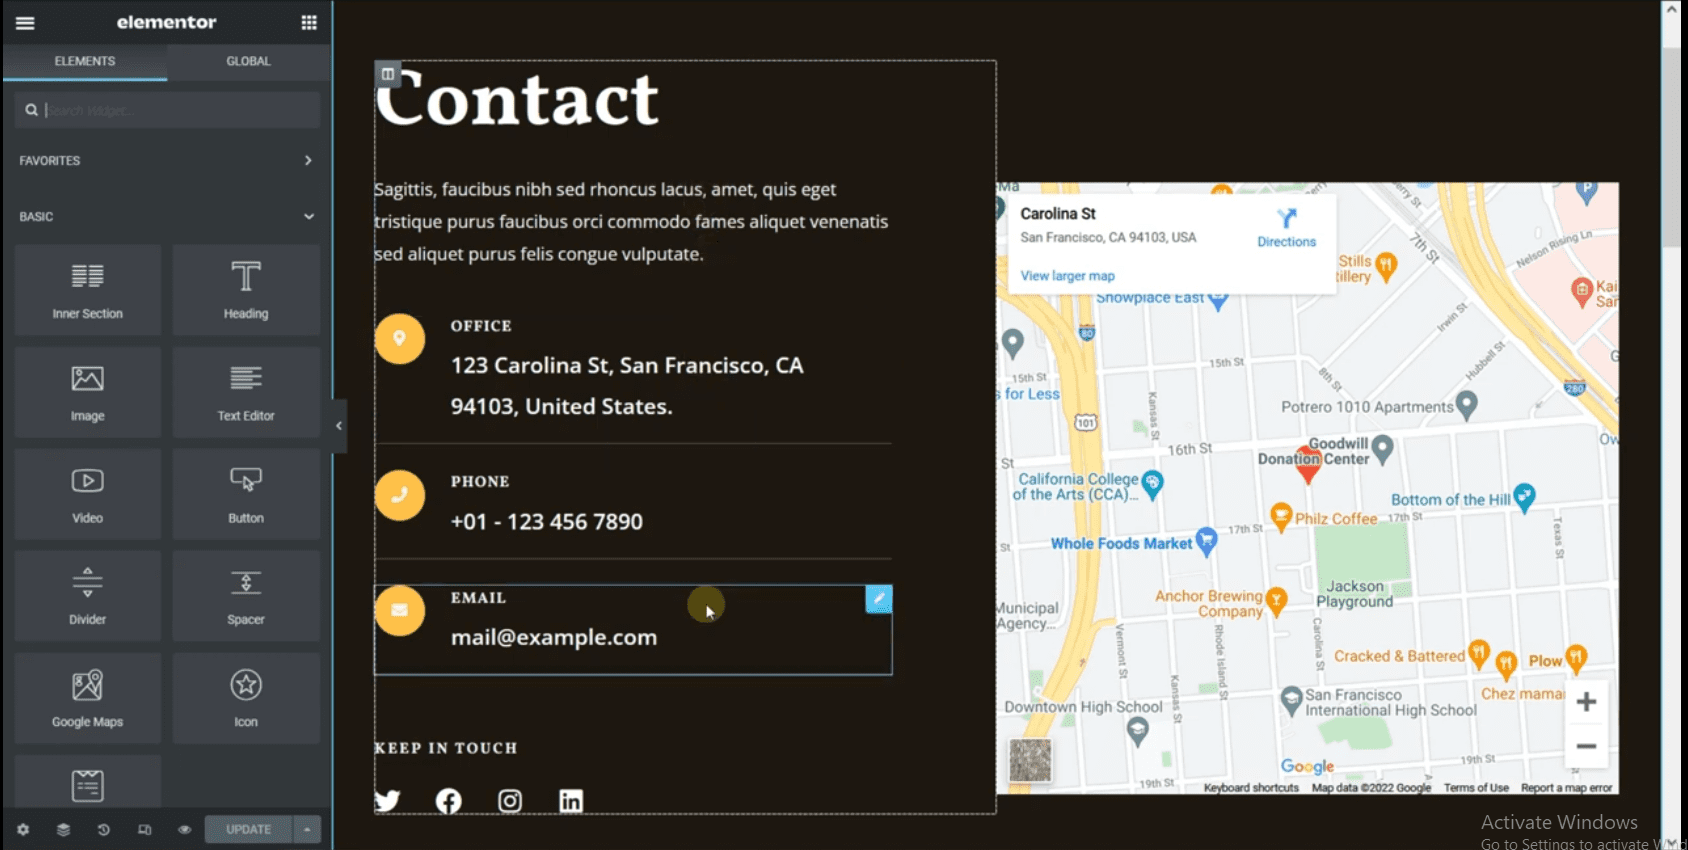 Add business address and contact information to contact page